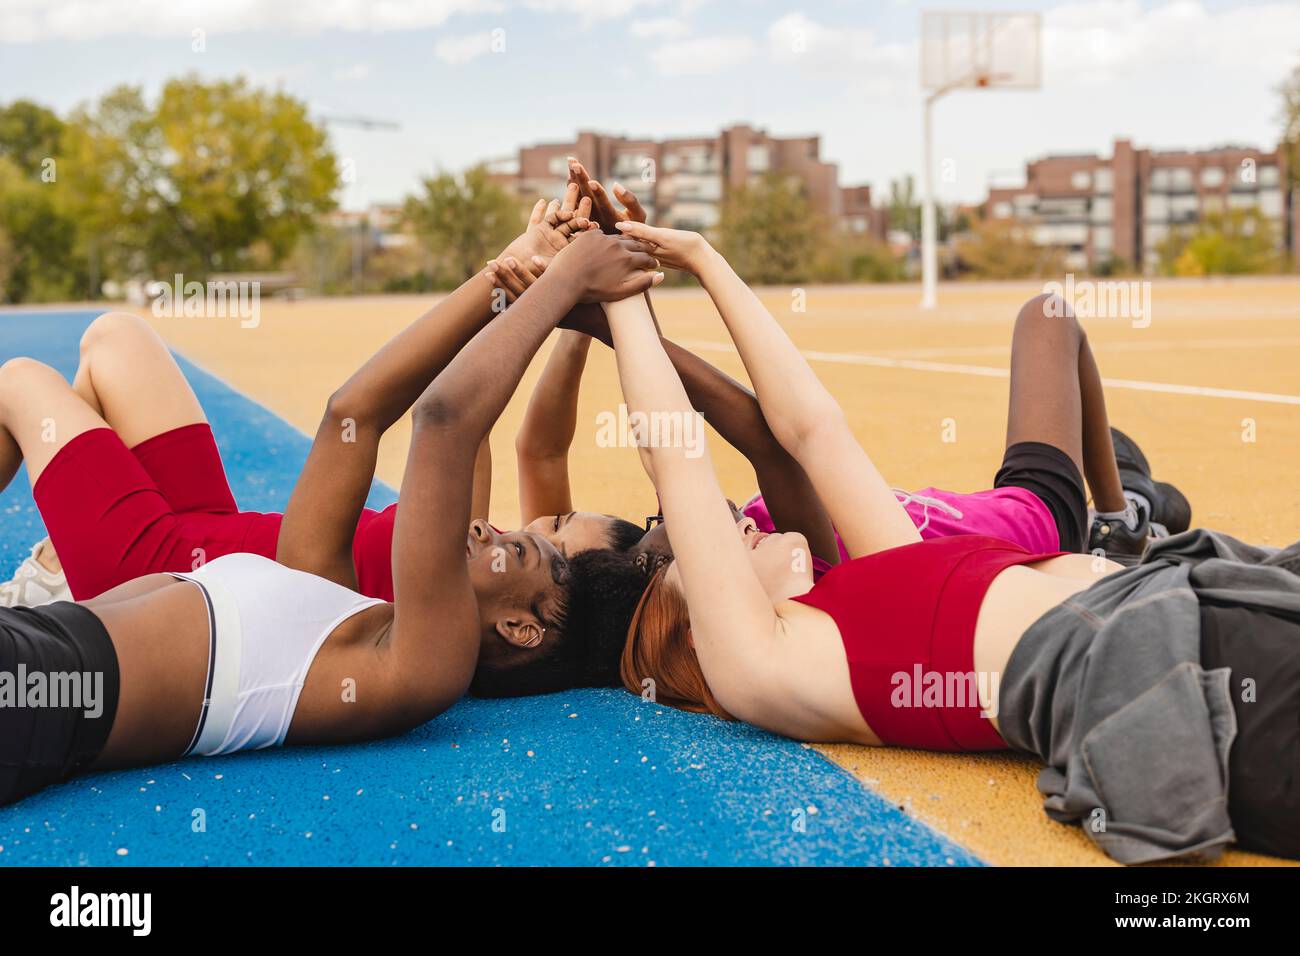 Young women lying down with hands raised in sports court Stock Photo